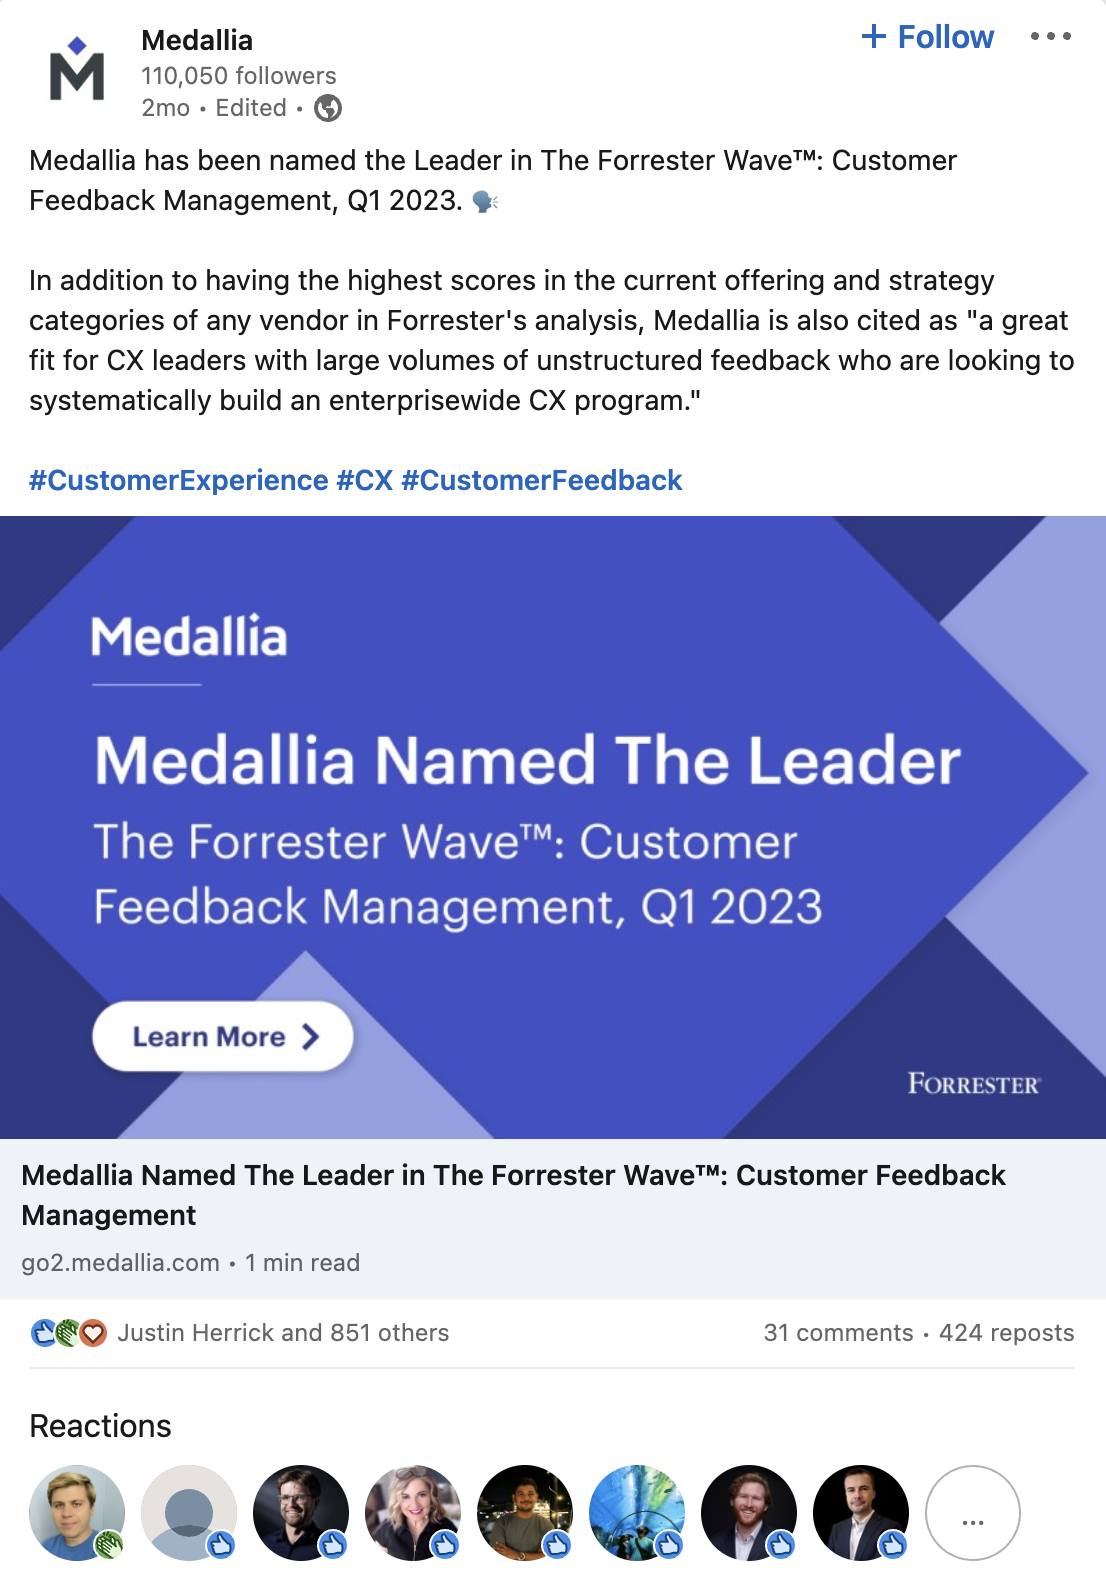 LinkedIn post from Medallia announcing them being a leader in the Forrester Wave report